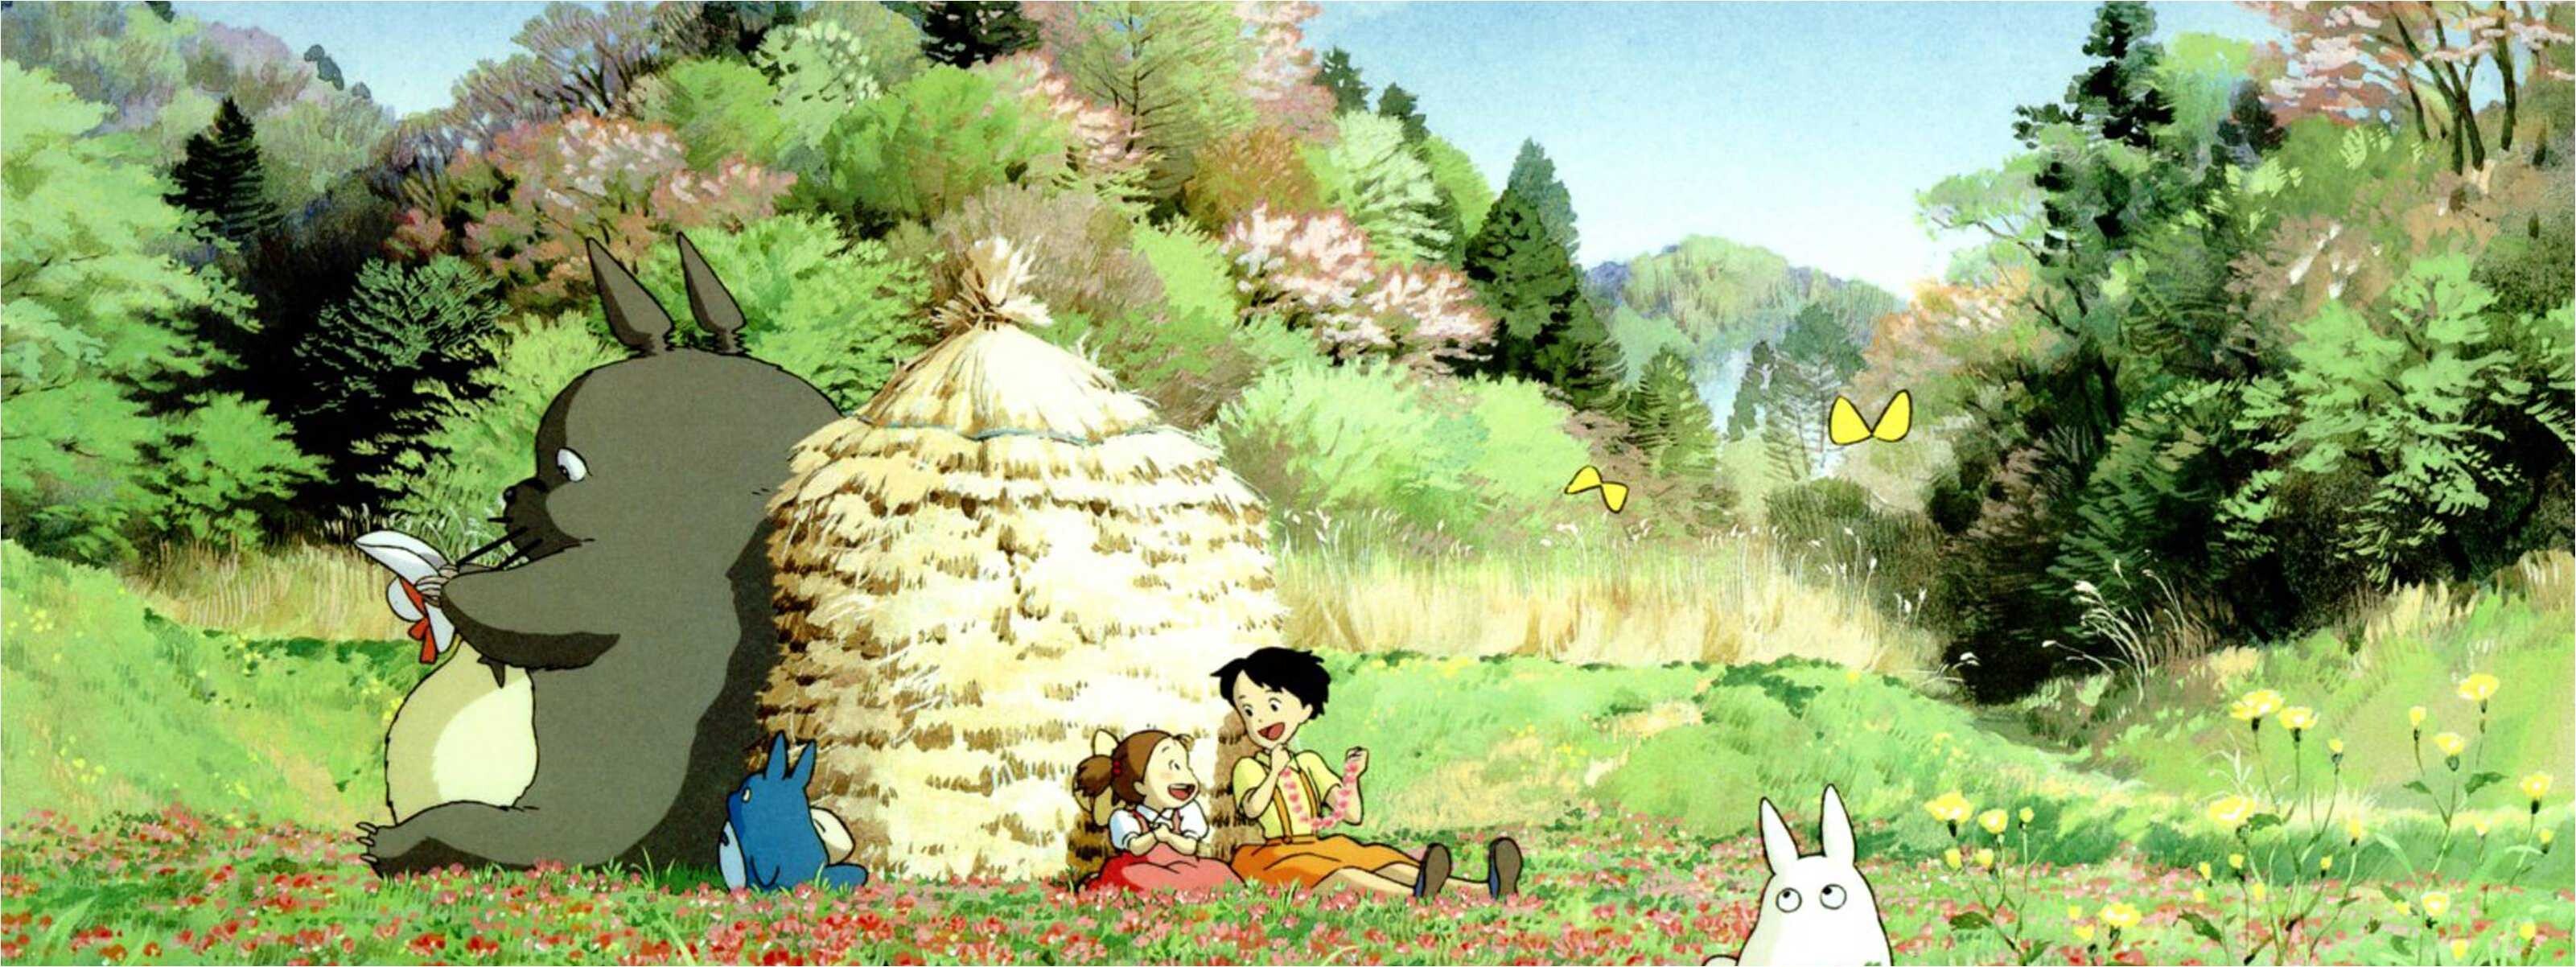 Studio Ghibli: The company's films are known for their intricate hand-drawn animation. 3210x1210 Dual Screen Wallpaper.